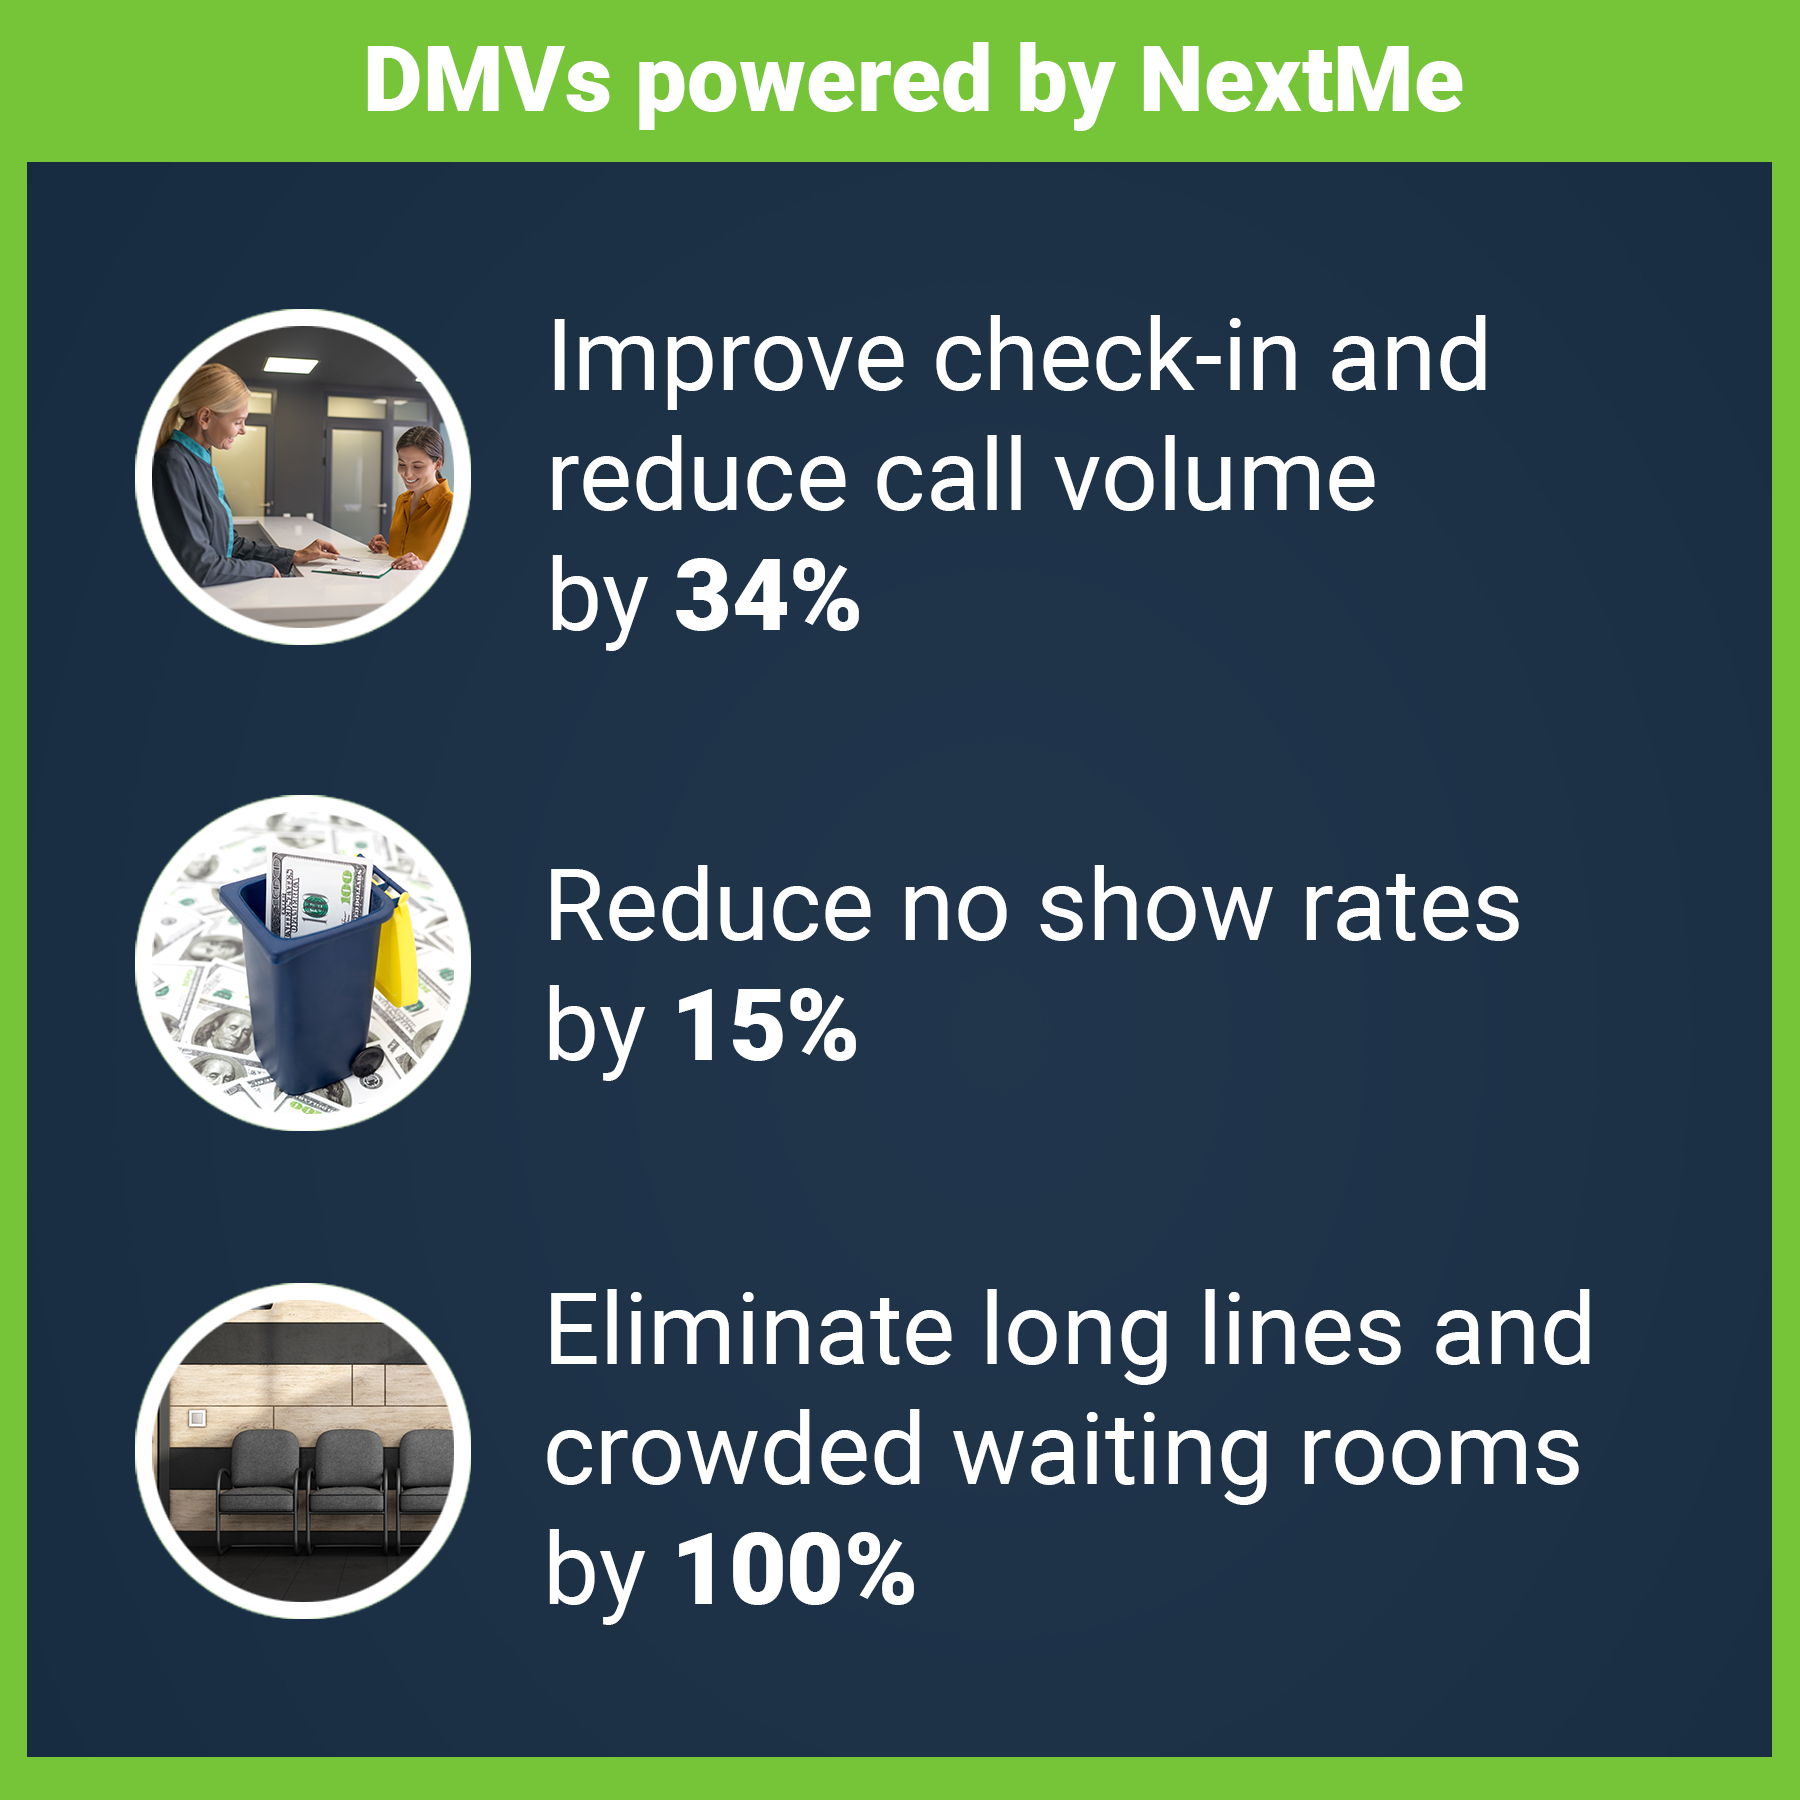 NextME Virtual Waitlist System Helps DMVs Reduce Call Volume, Reduce No-Show Rates & Eliminate Long Lines